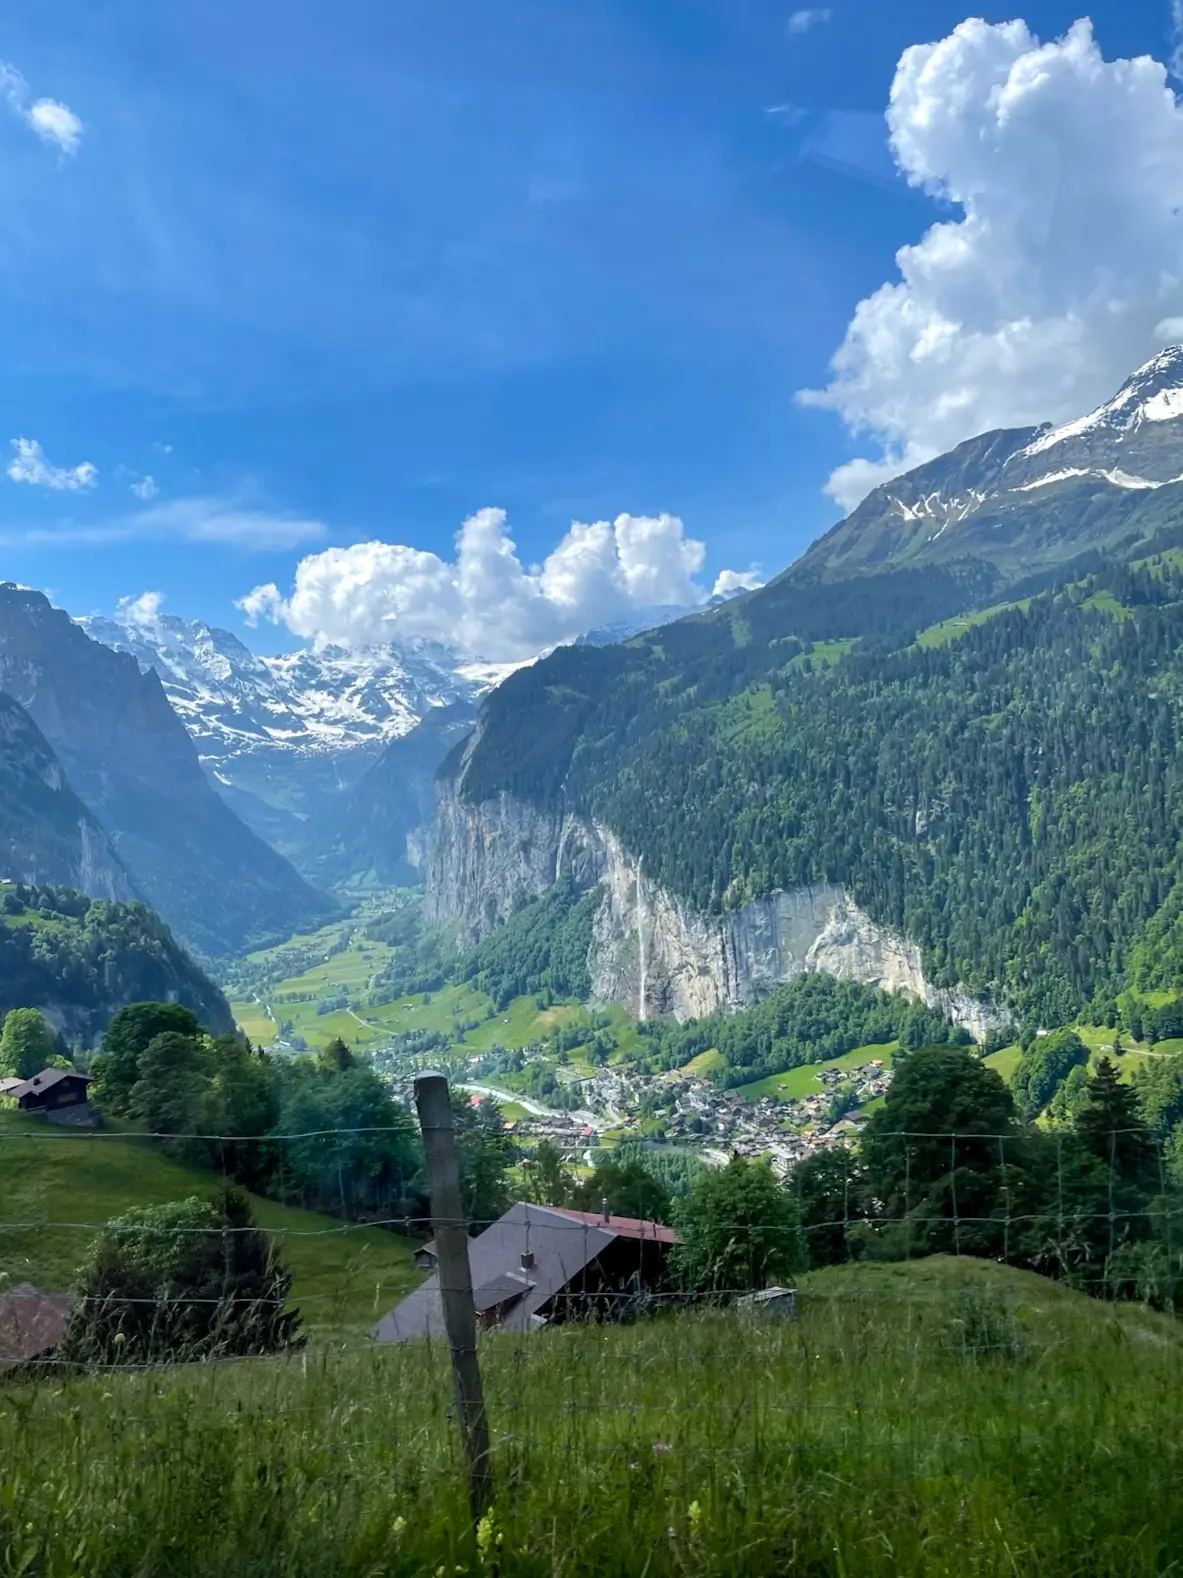 Lush green valley and traditional Swiss houses in Grindelwald with snow-capped mountains in the distance